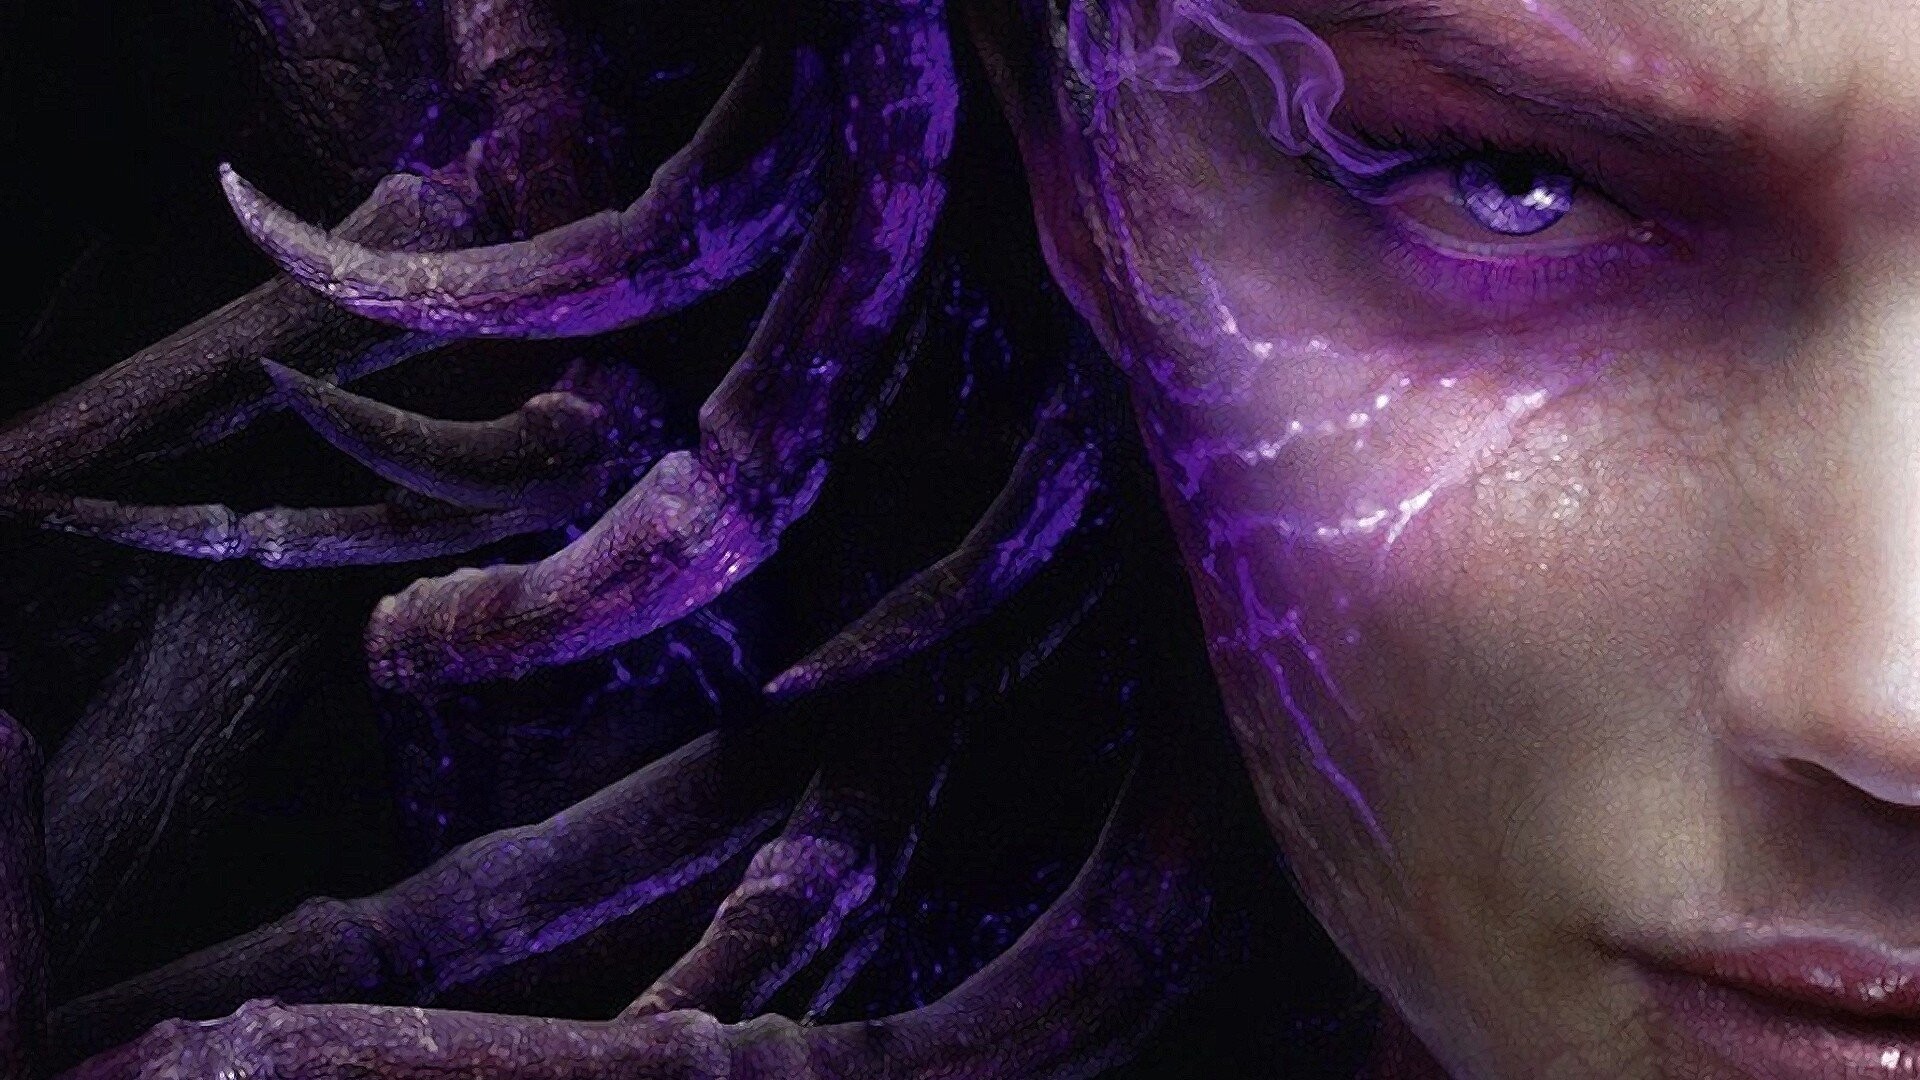 Ghost (Kerrigan): Infested Sarah, The Overmind, Extremely calculating and manipulative character in the StarCraft II video game. 1920x1080 Full HD Wallpaper.